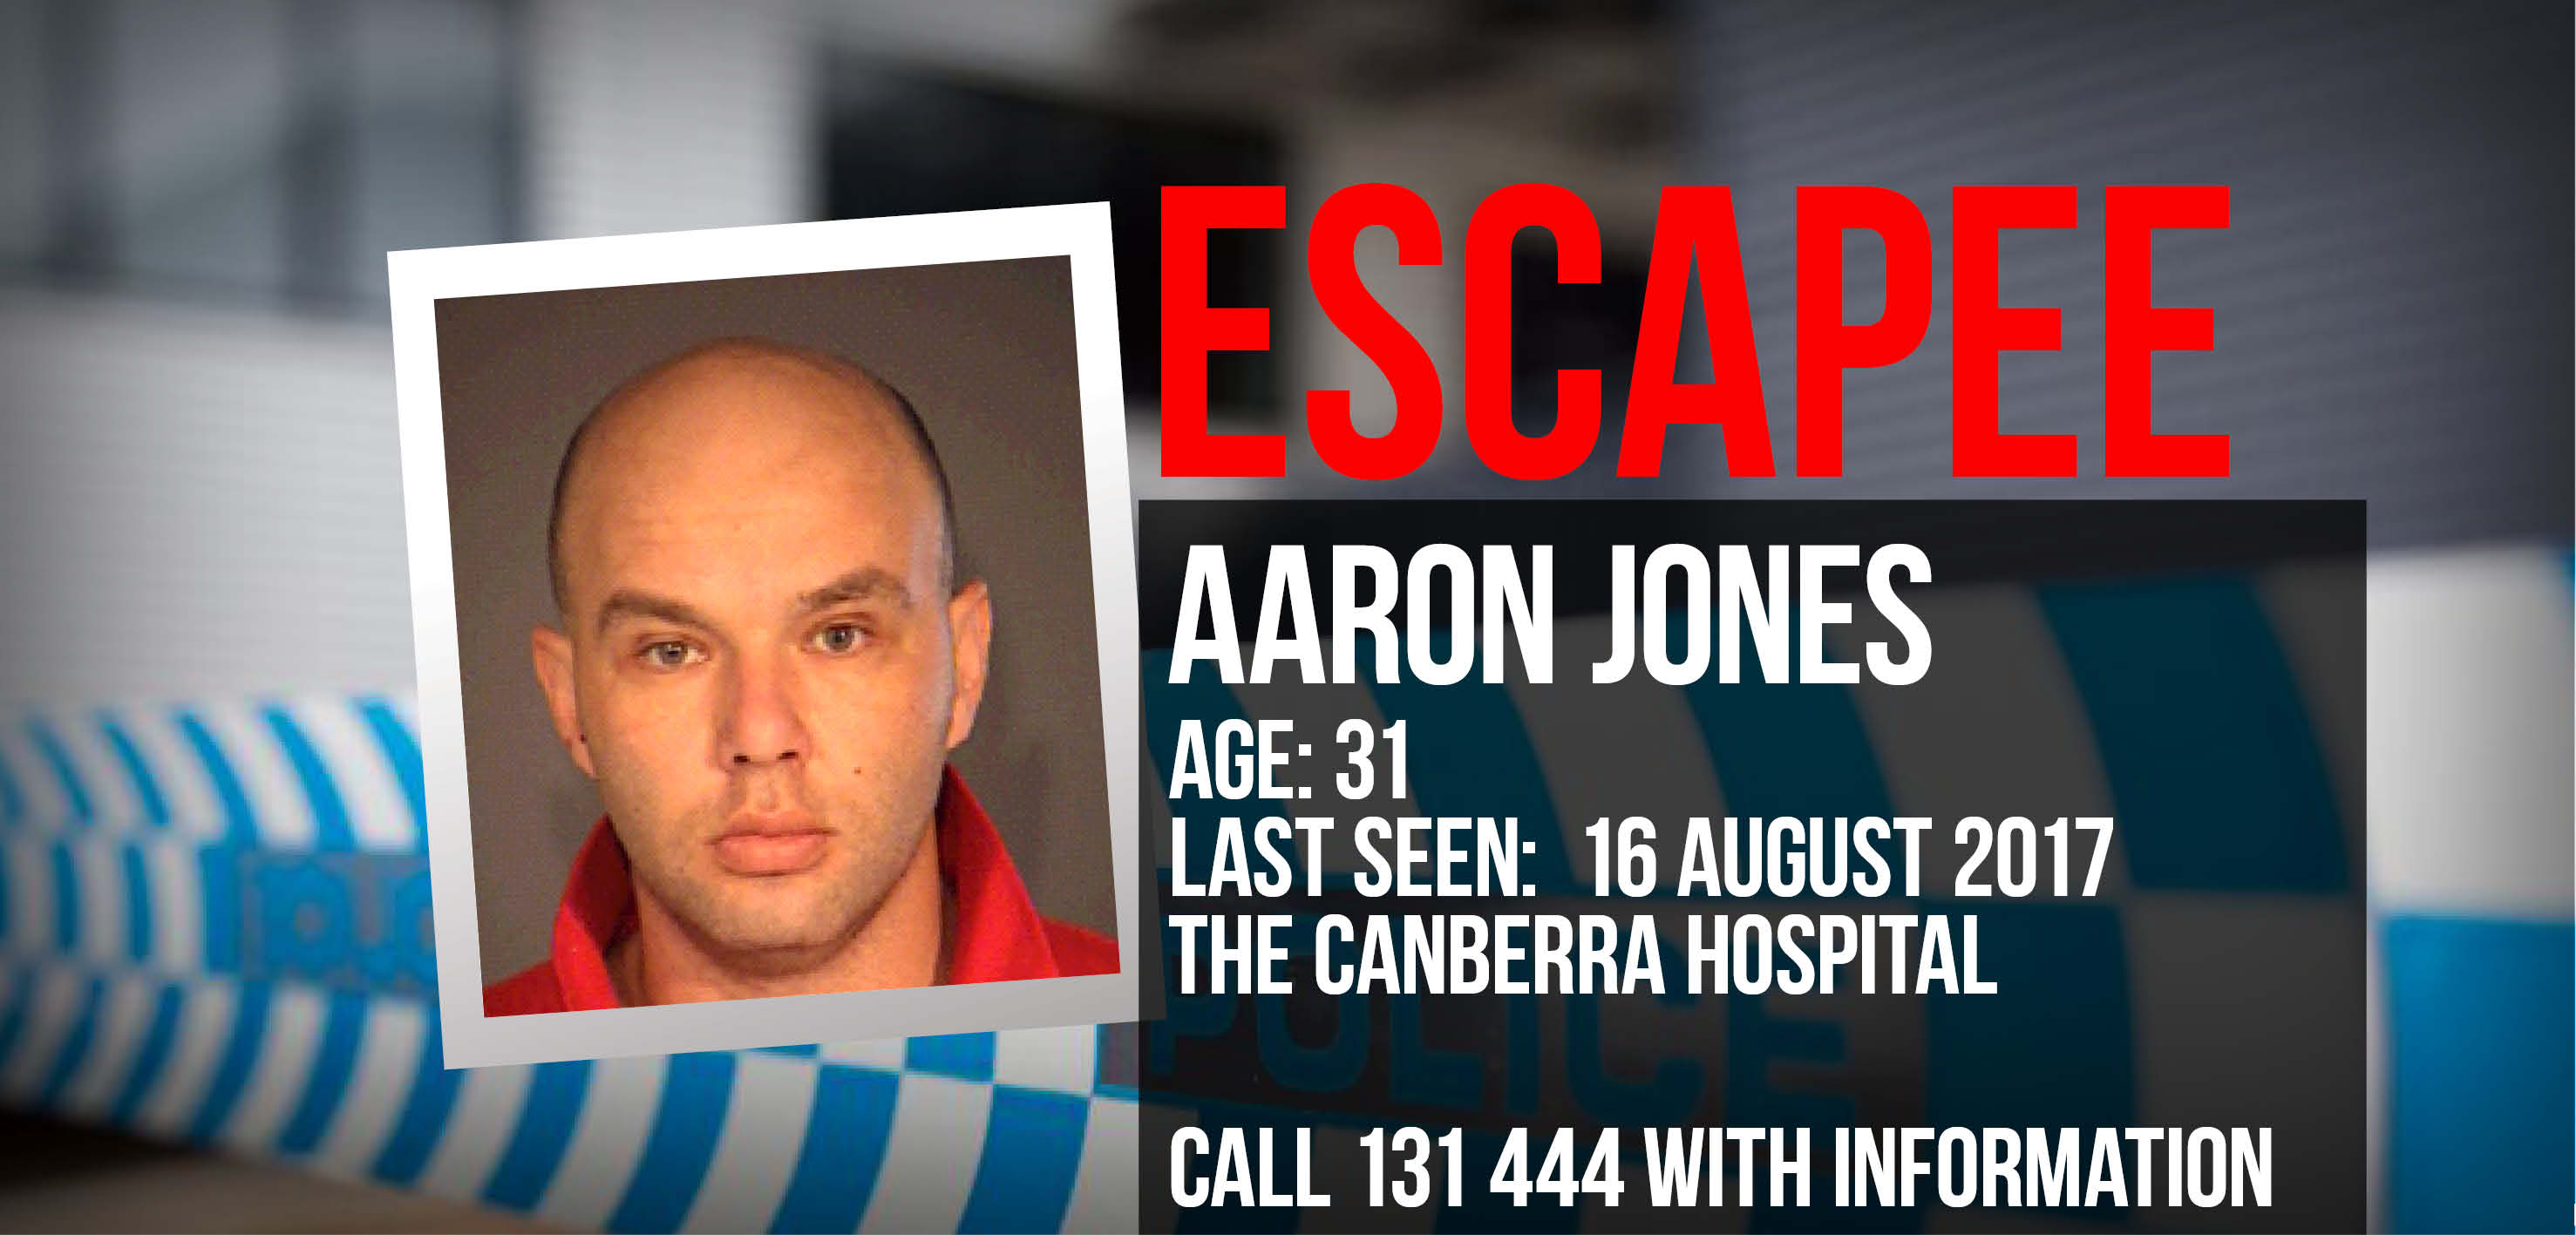 Police are searching for Aaron Jones